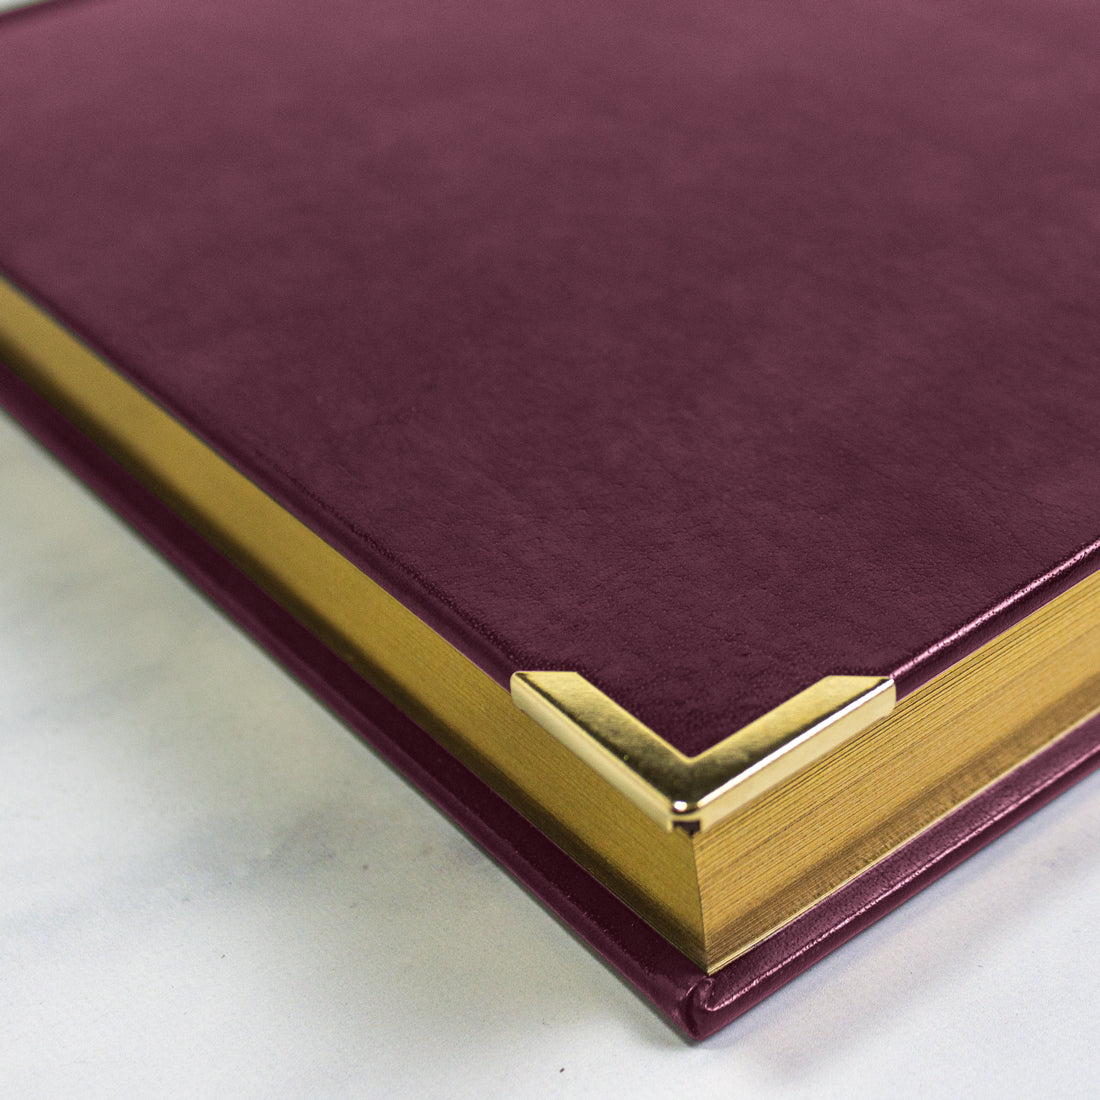 Executive Daily Planner 2024, Burgundy